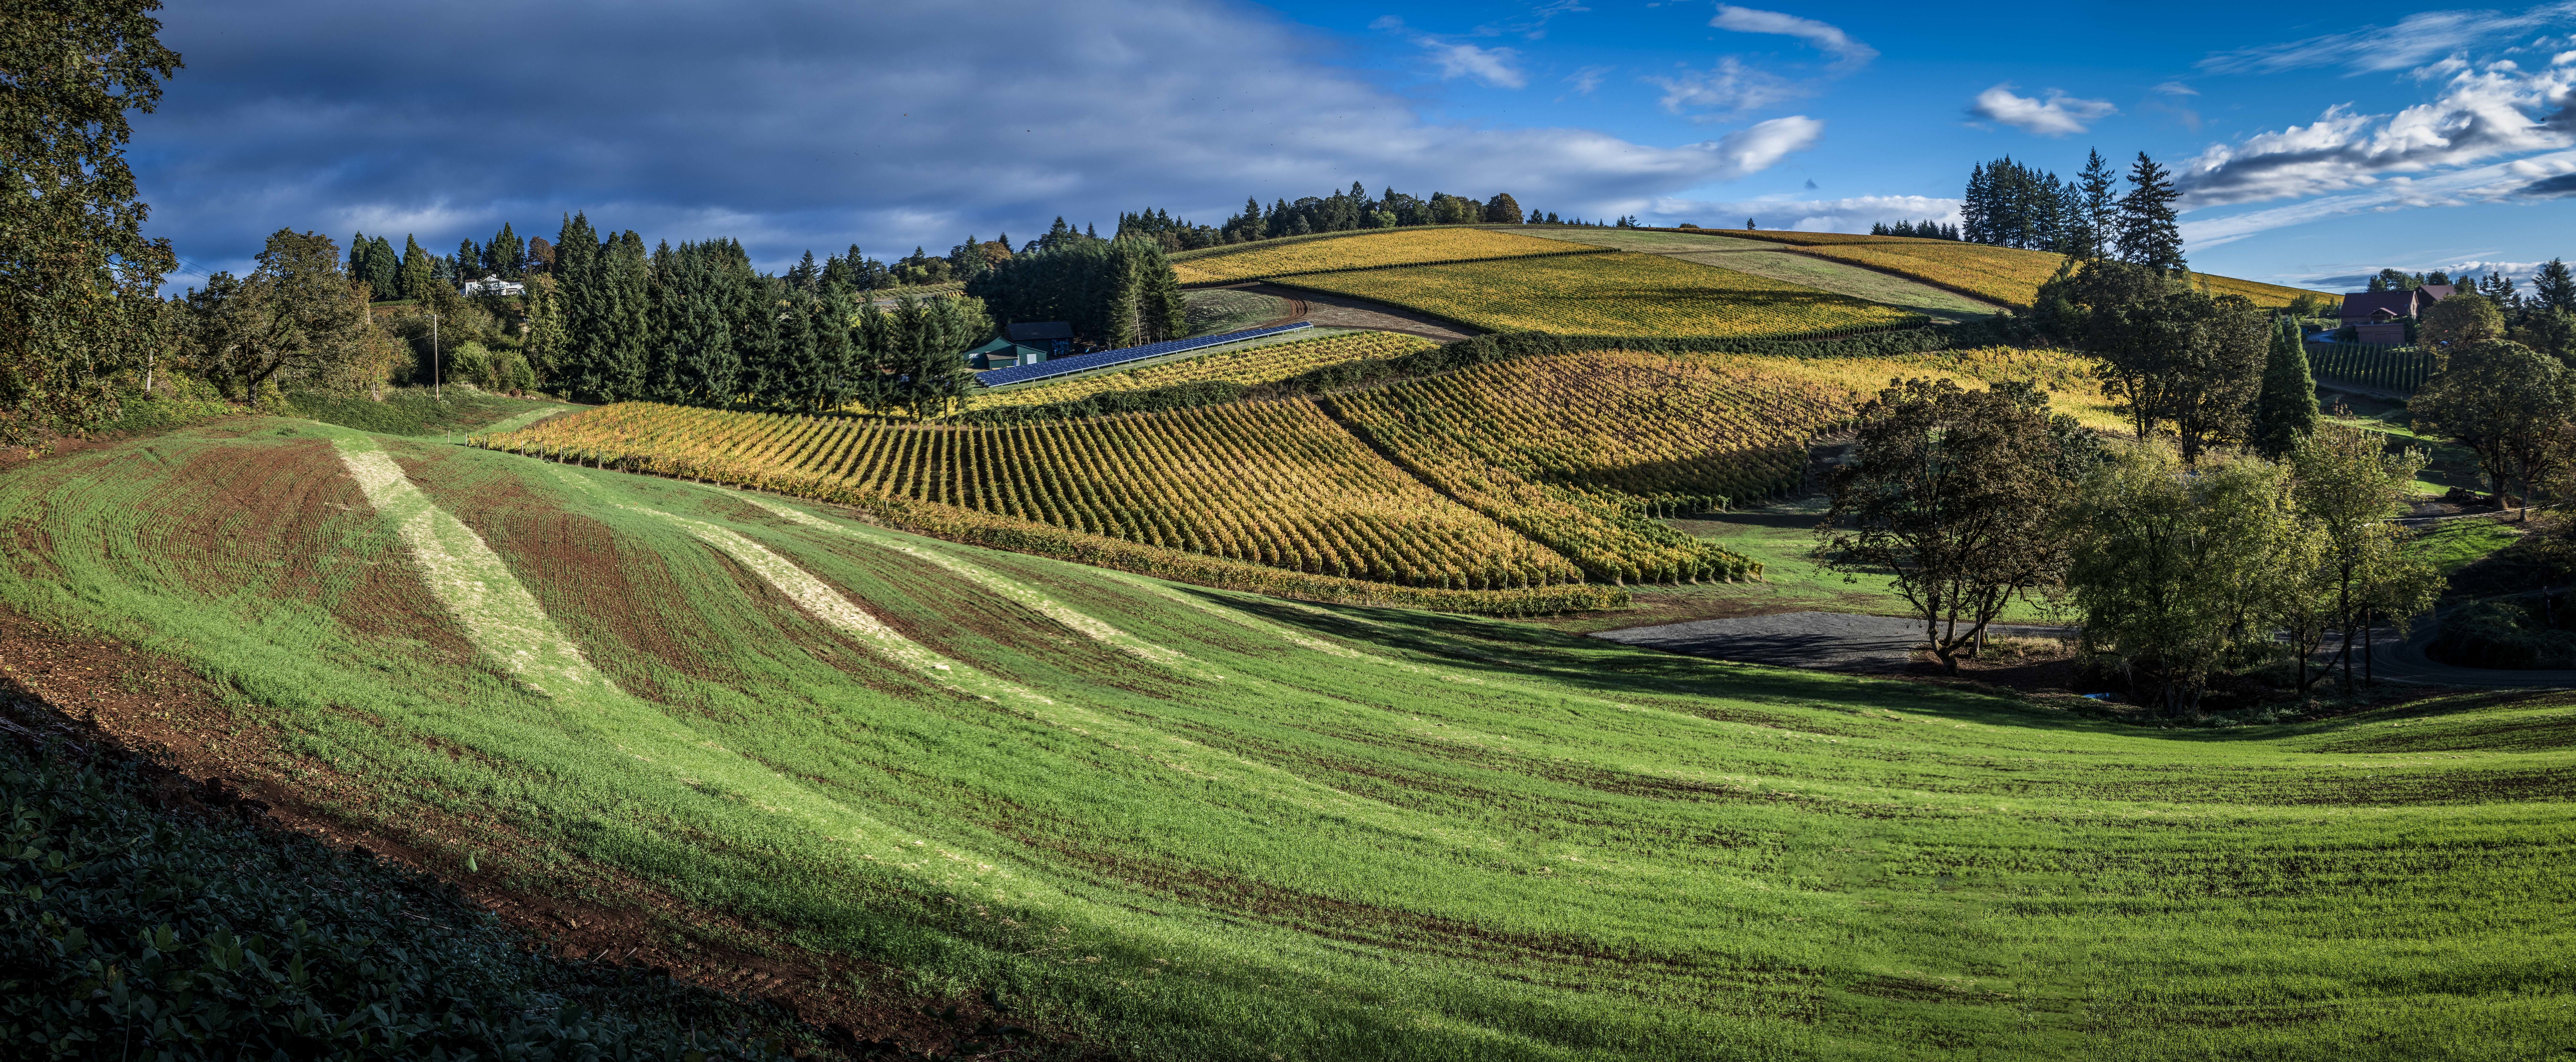 Vineyards and rolling hills in Oregon